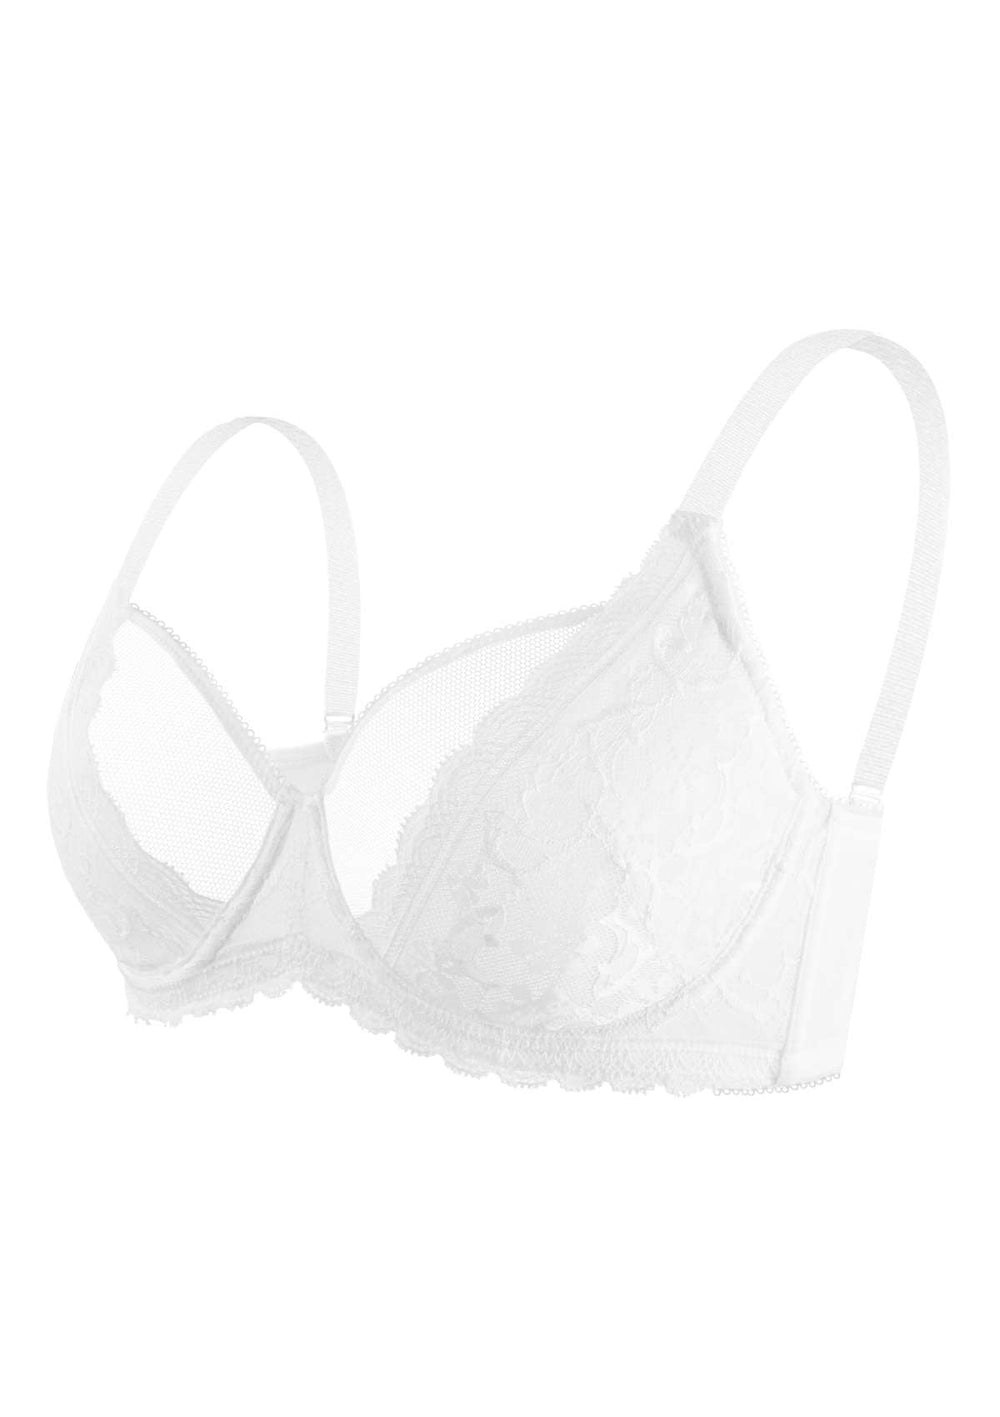 hsialife.official on Instagram: 👙🤩Our Anemone Unlined Lace Bra